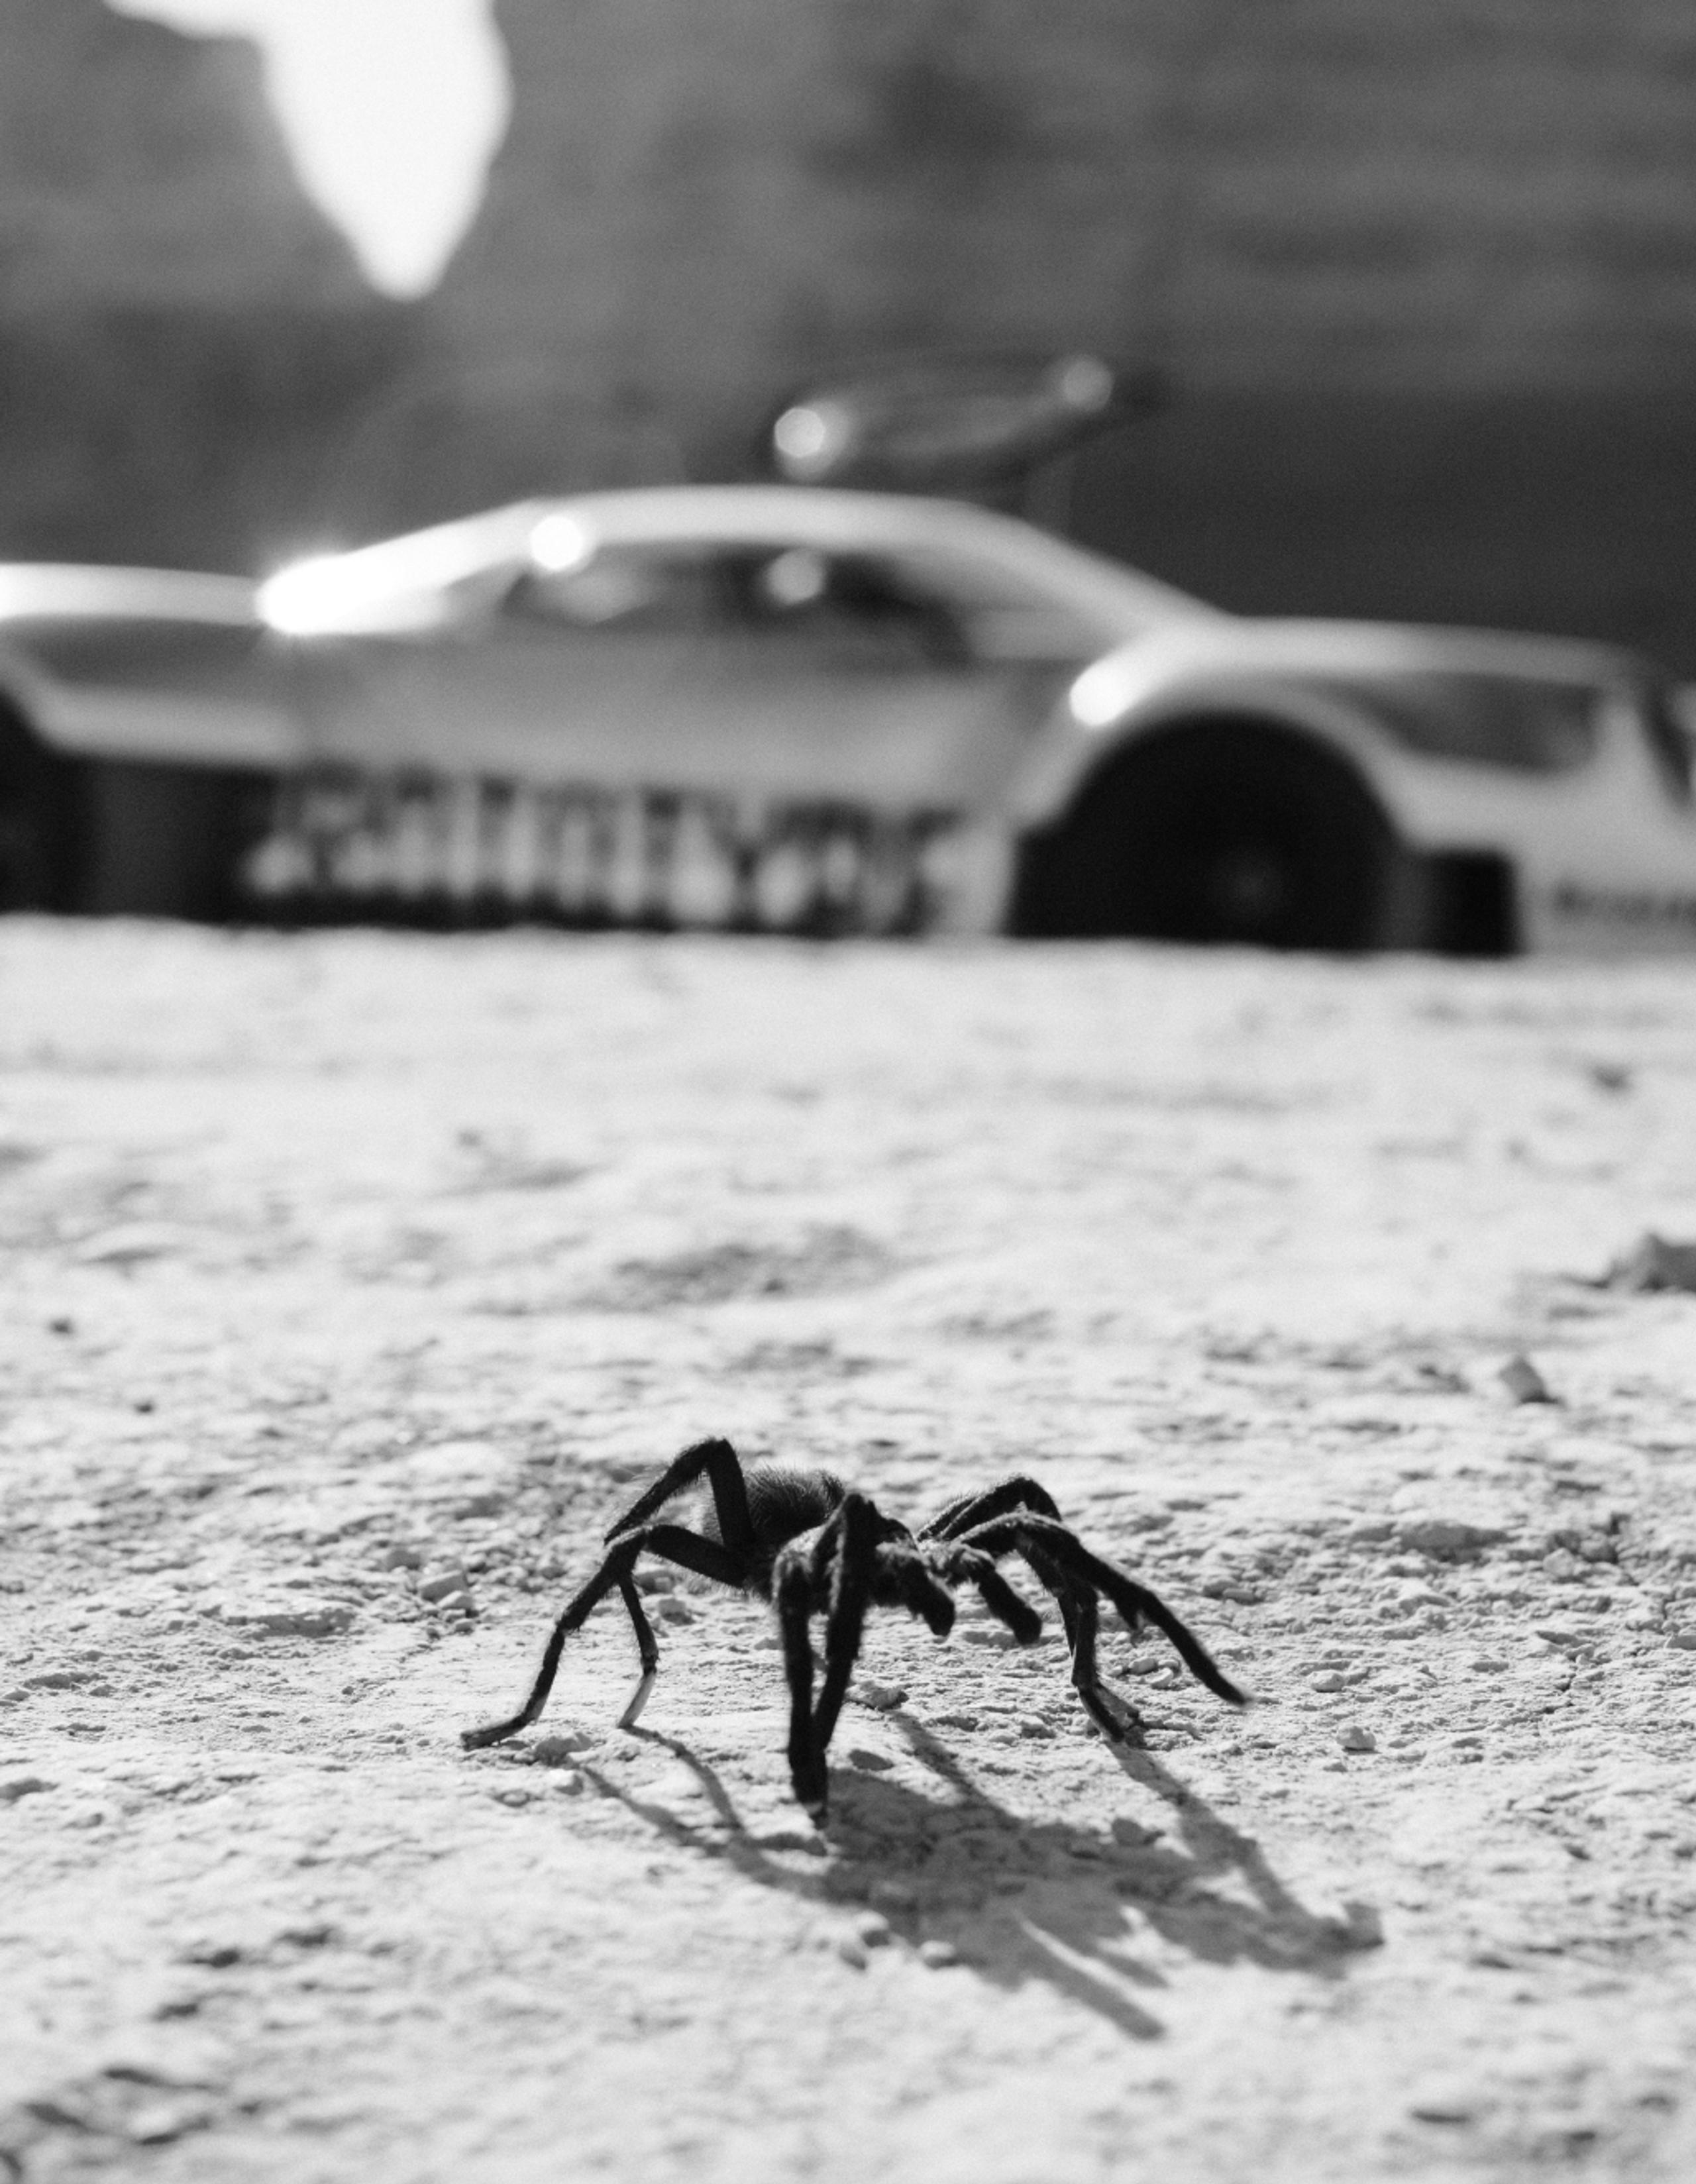 Tarantula in foreground and Hall11 prototype race car in the background